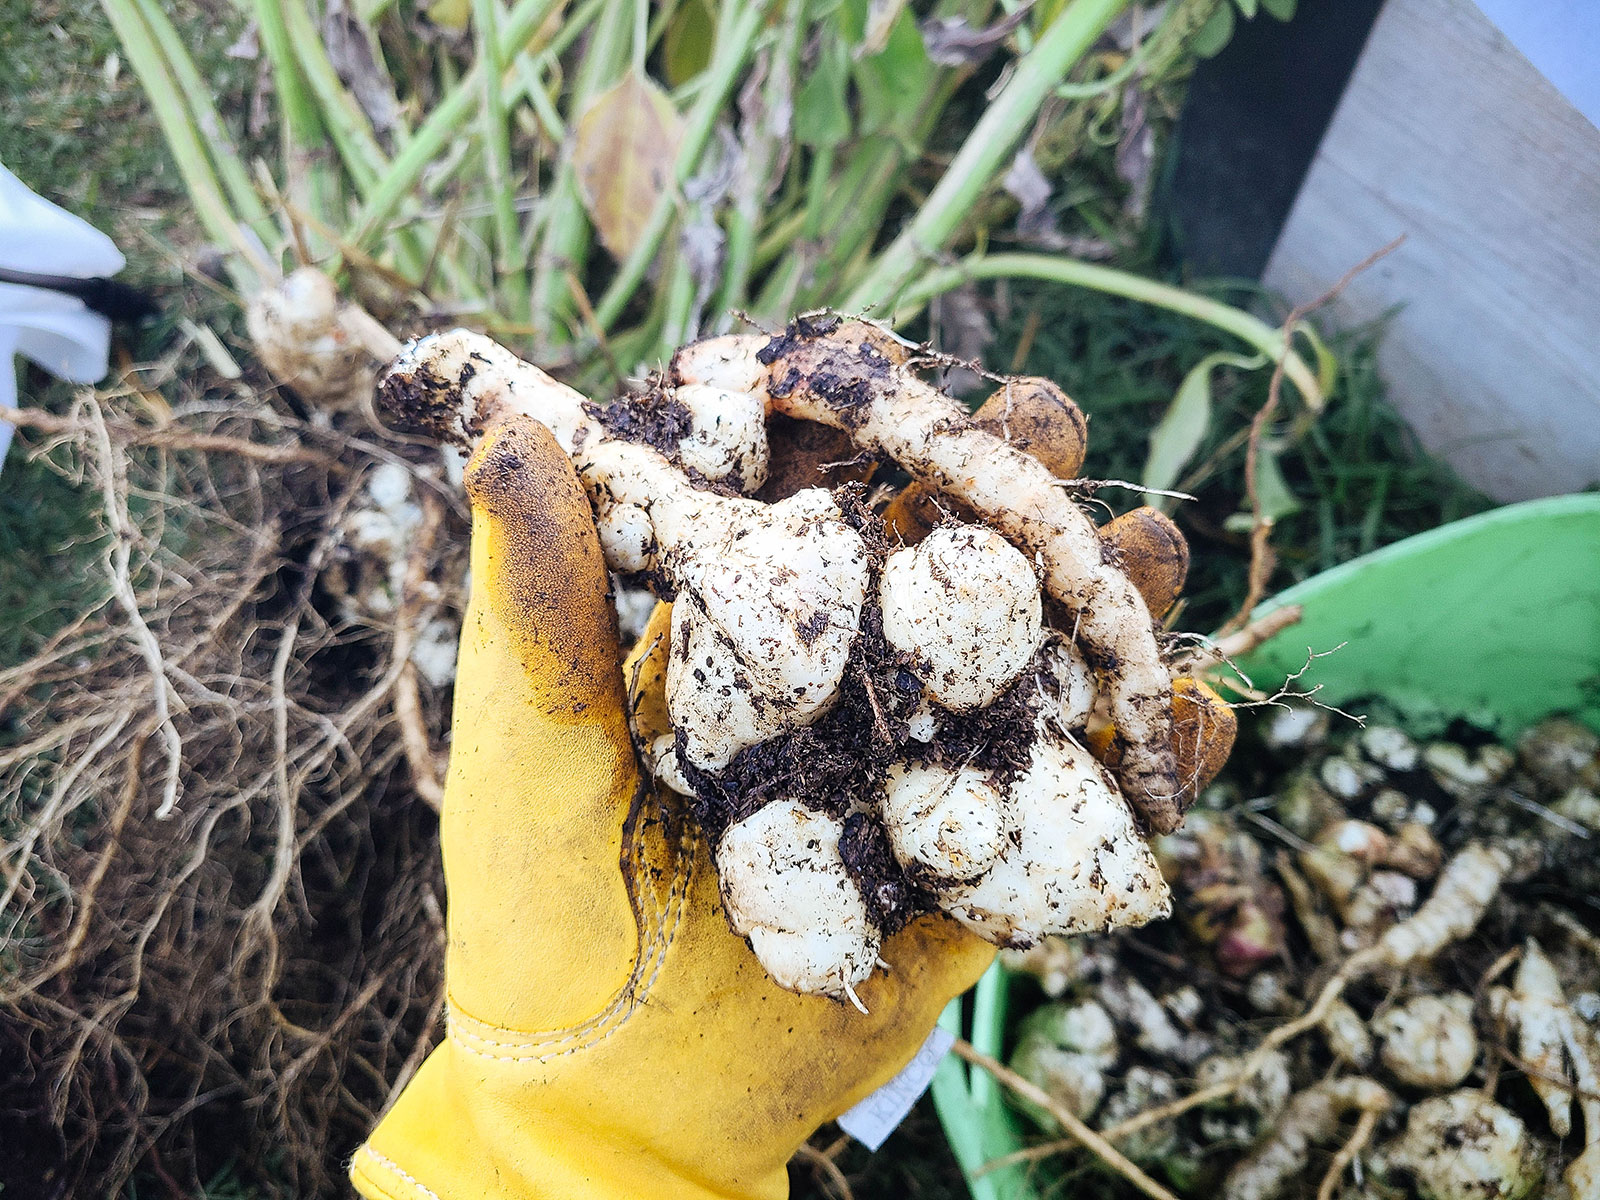 Hand in yellow glove holding a cluster of newly dug sunchoke tubers